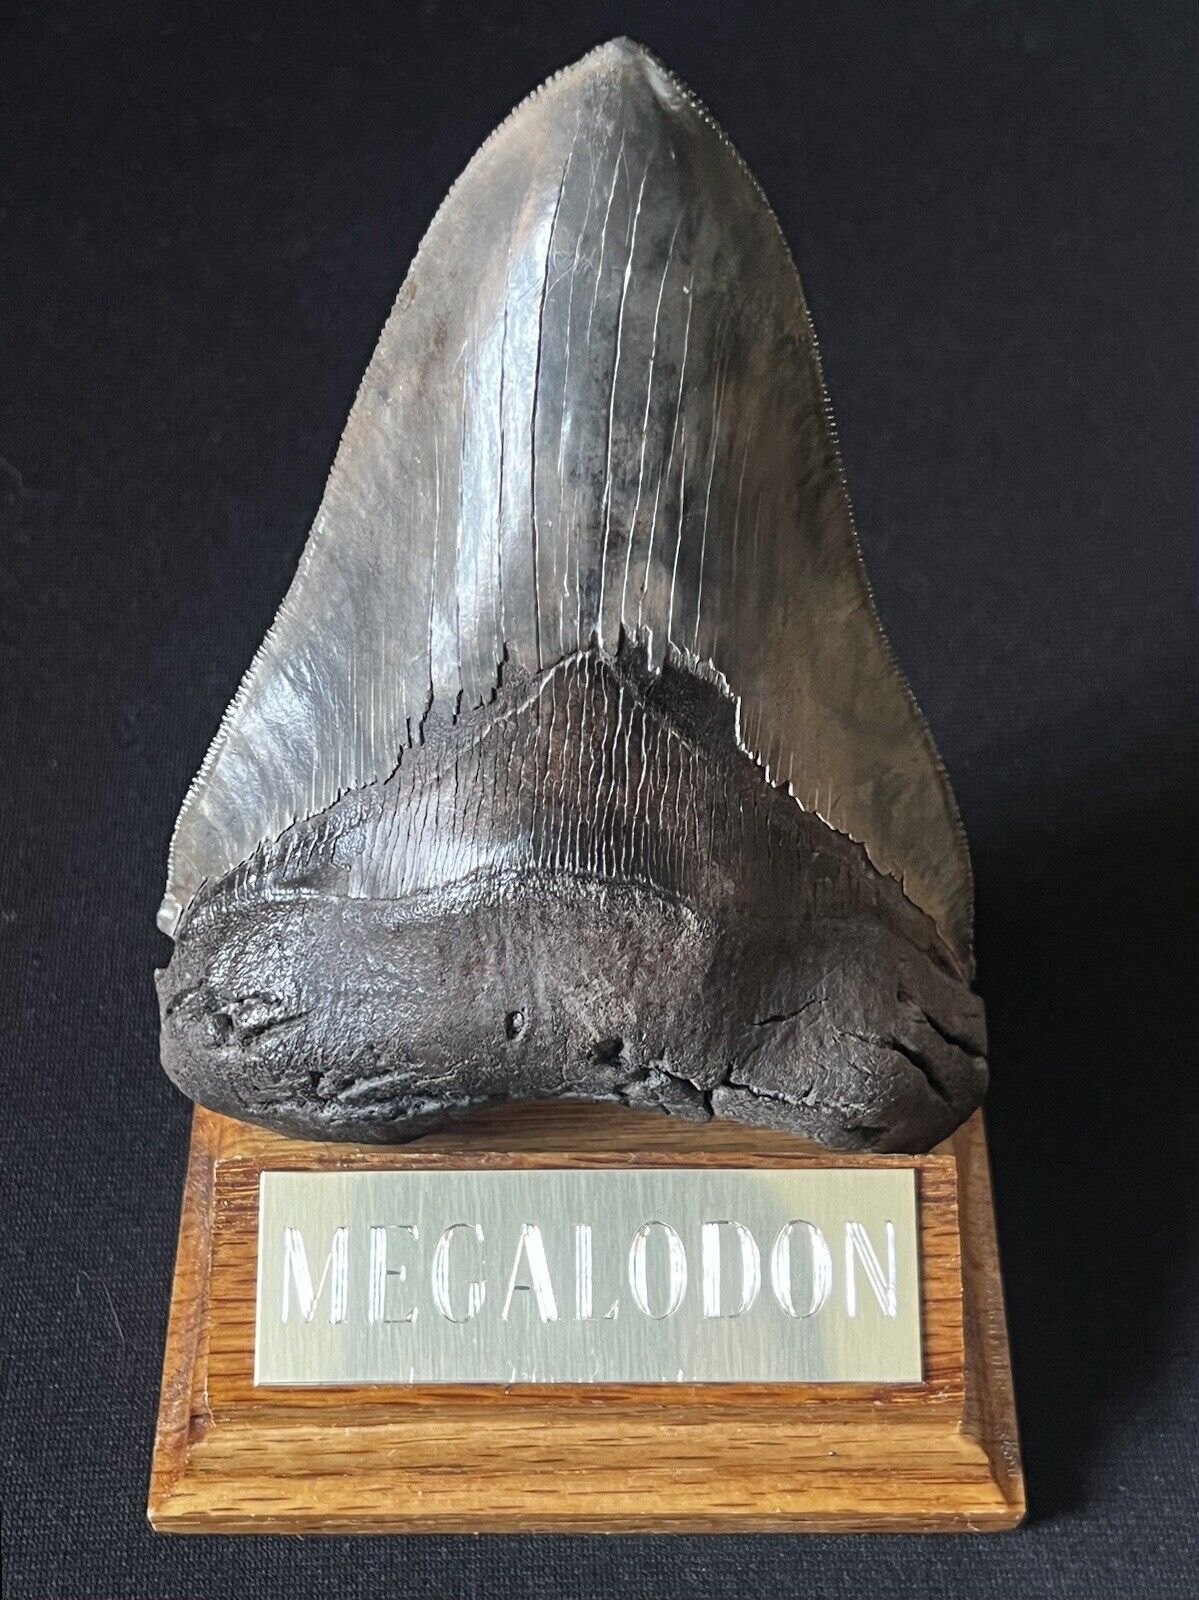 5.3” Inch Killer Megalodon Tooth For Sale With Fossil Whale Bone Bite Marks